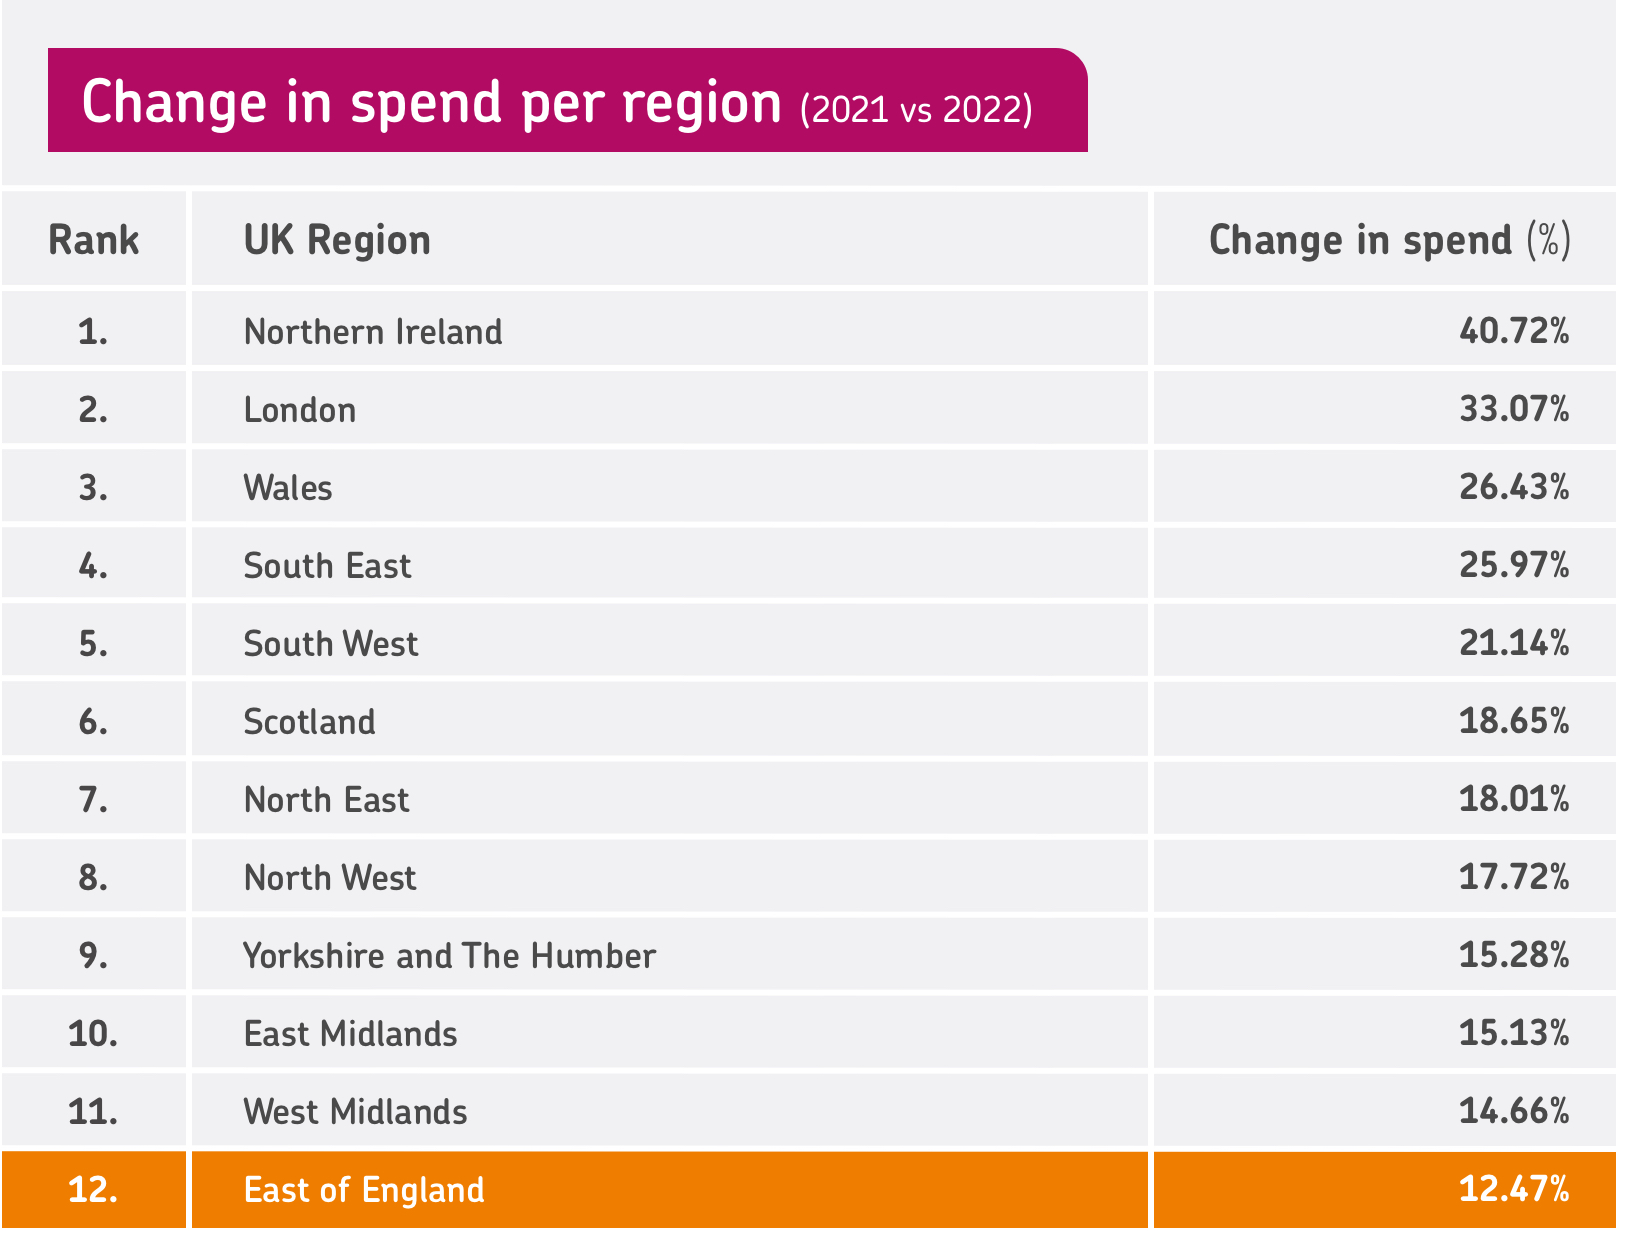 Table showing how spending increased for each region in 2022 vs 2021, with East of England highlighted at the bottom